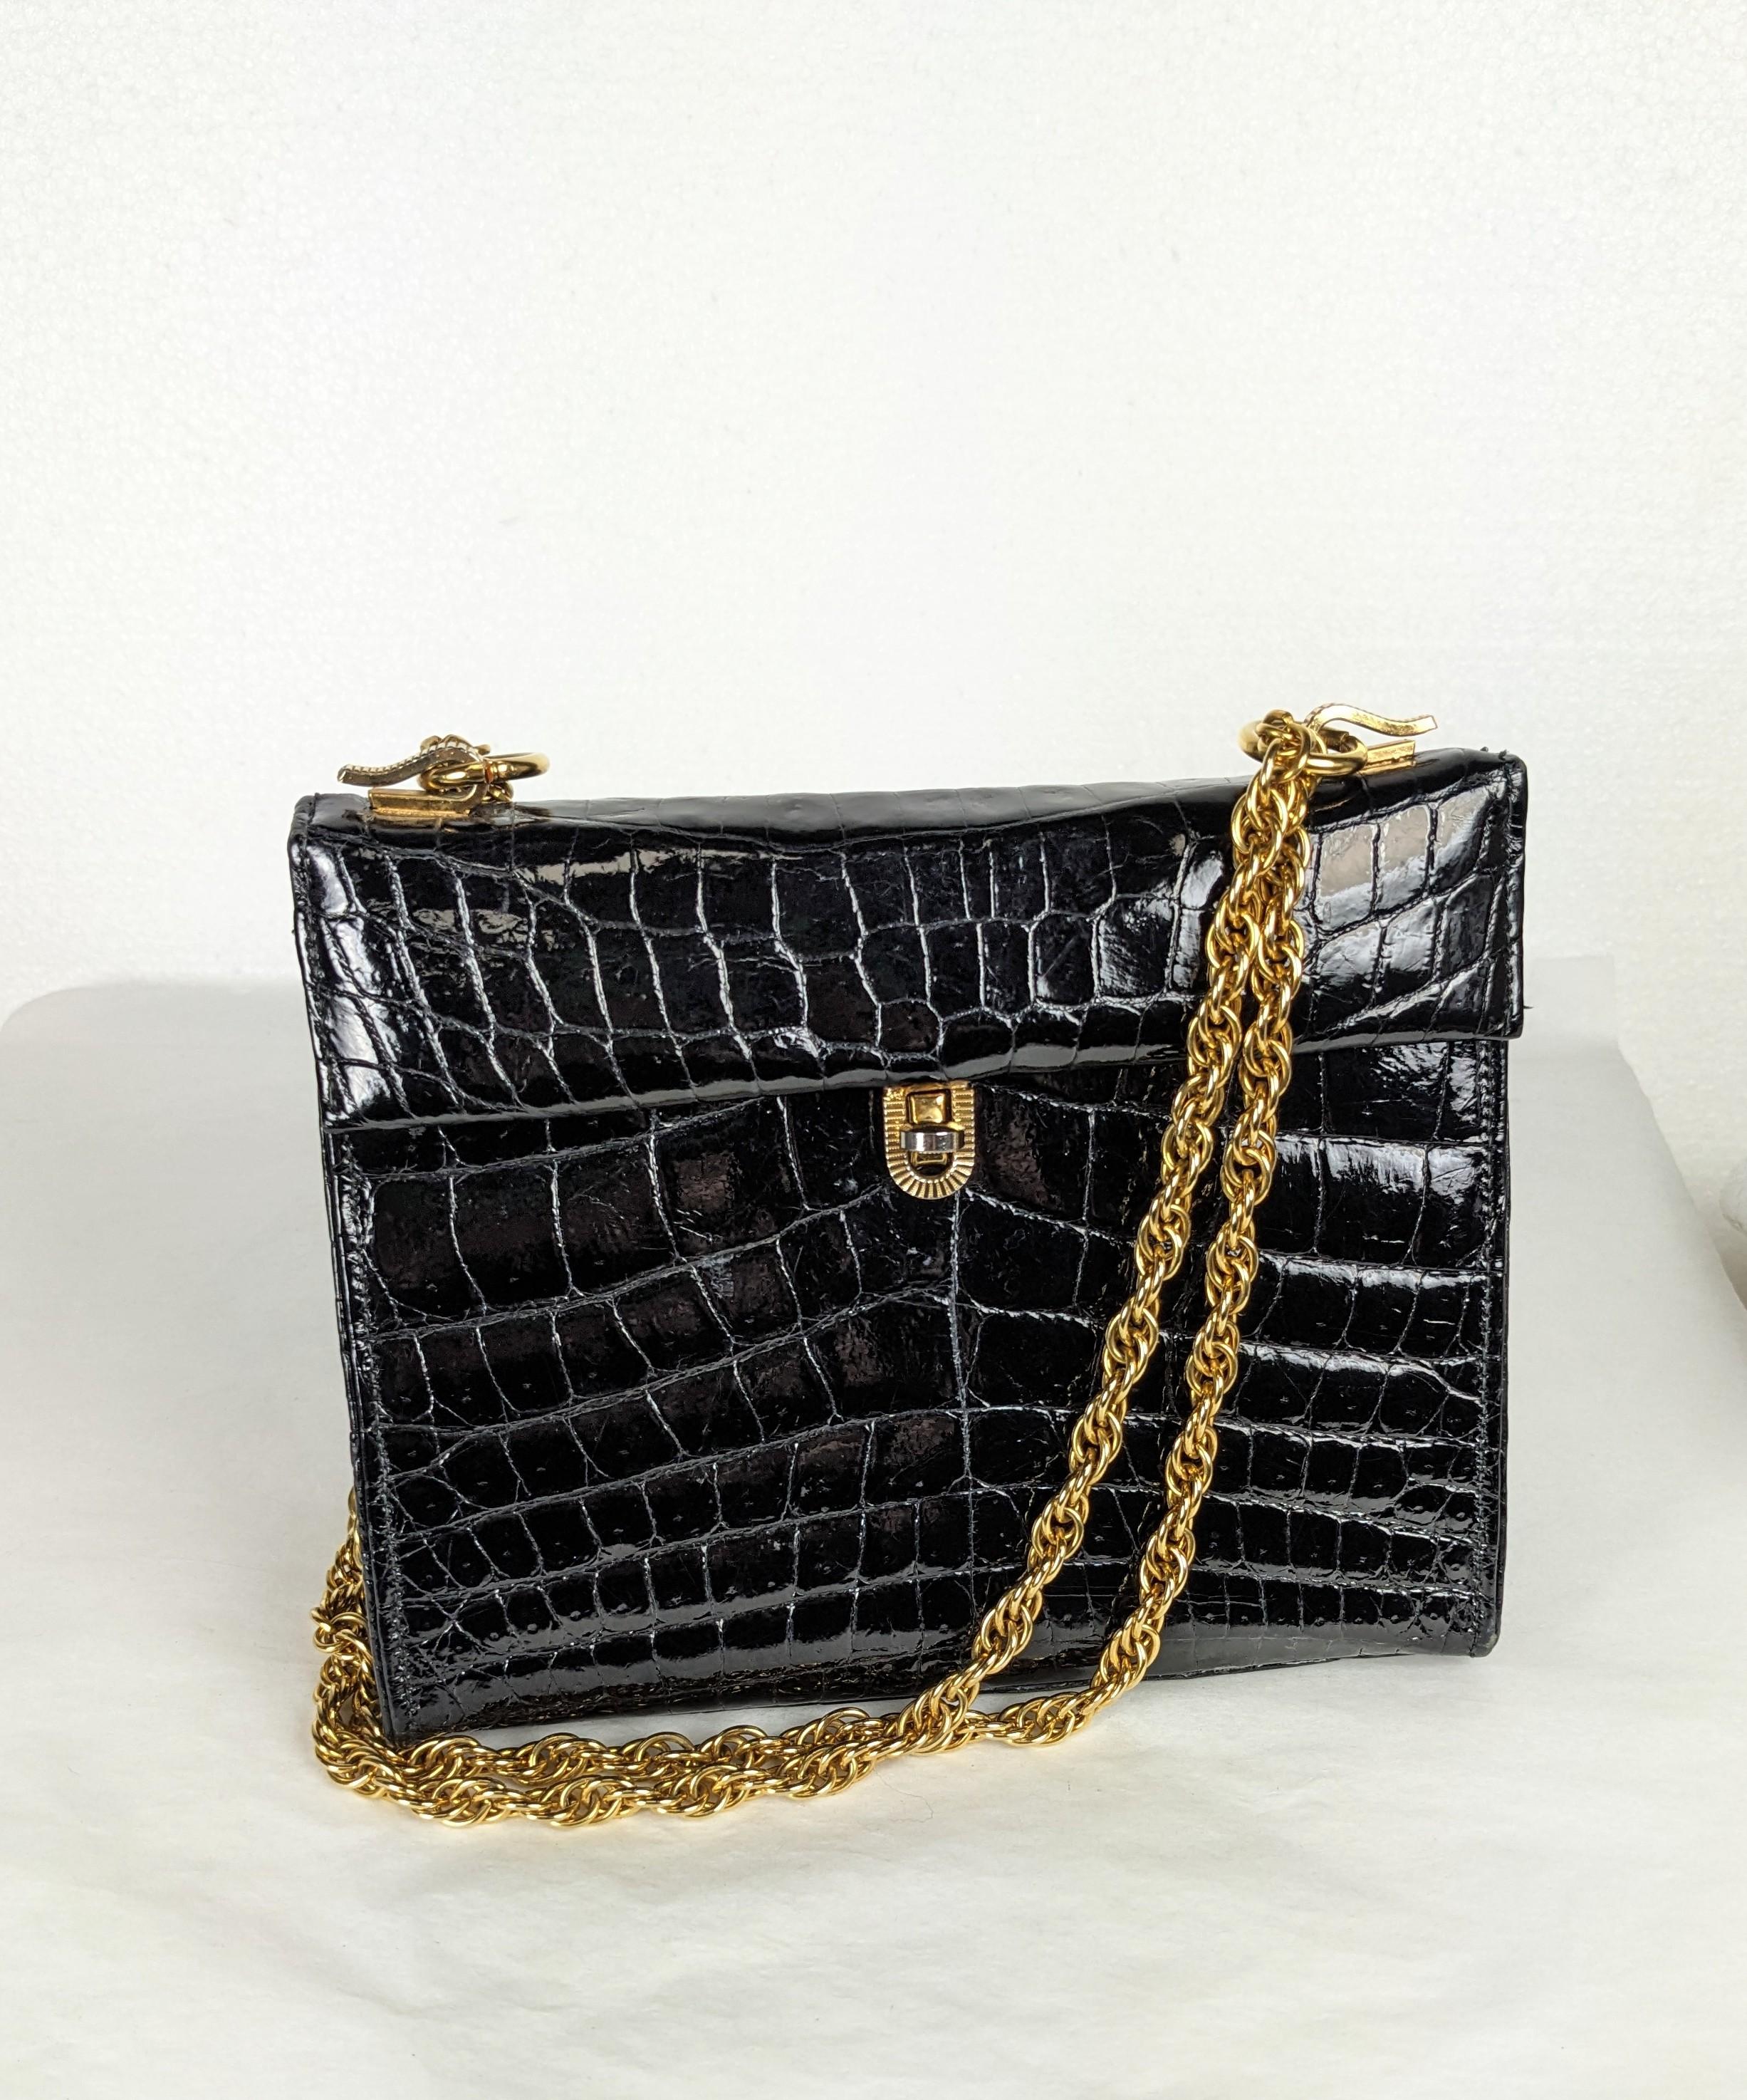 Mini Alligator Structured Shoulder Bag In Good Condition For Sale In New York, NY